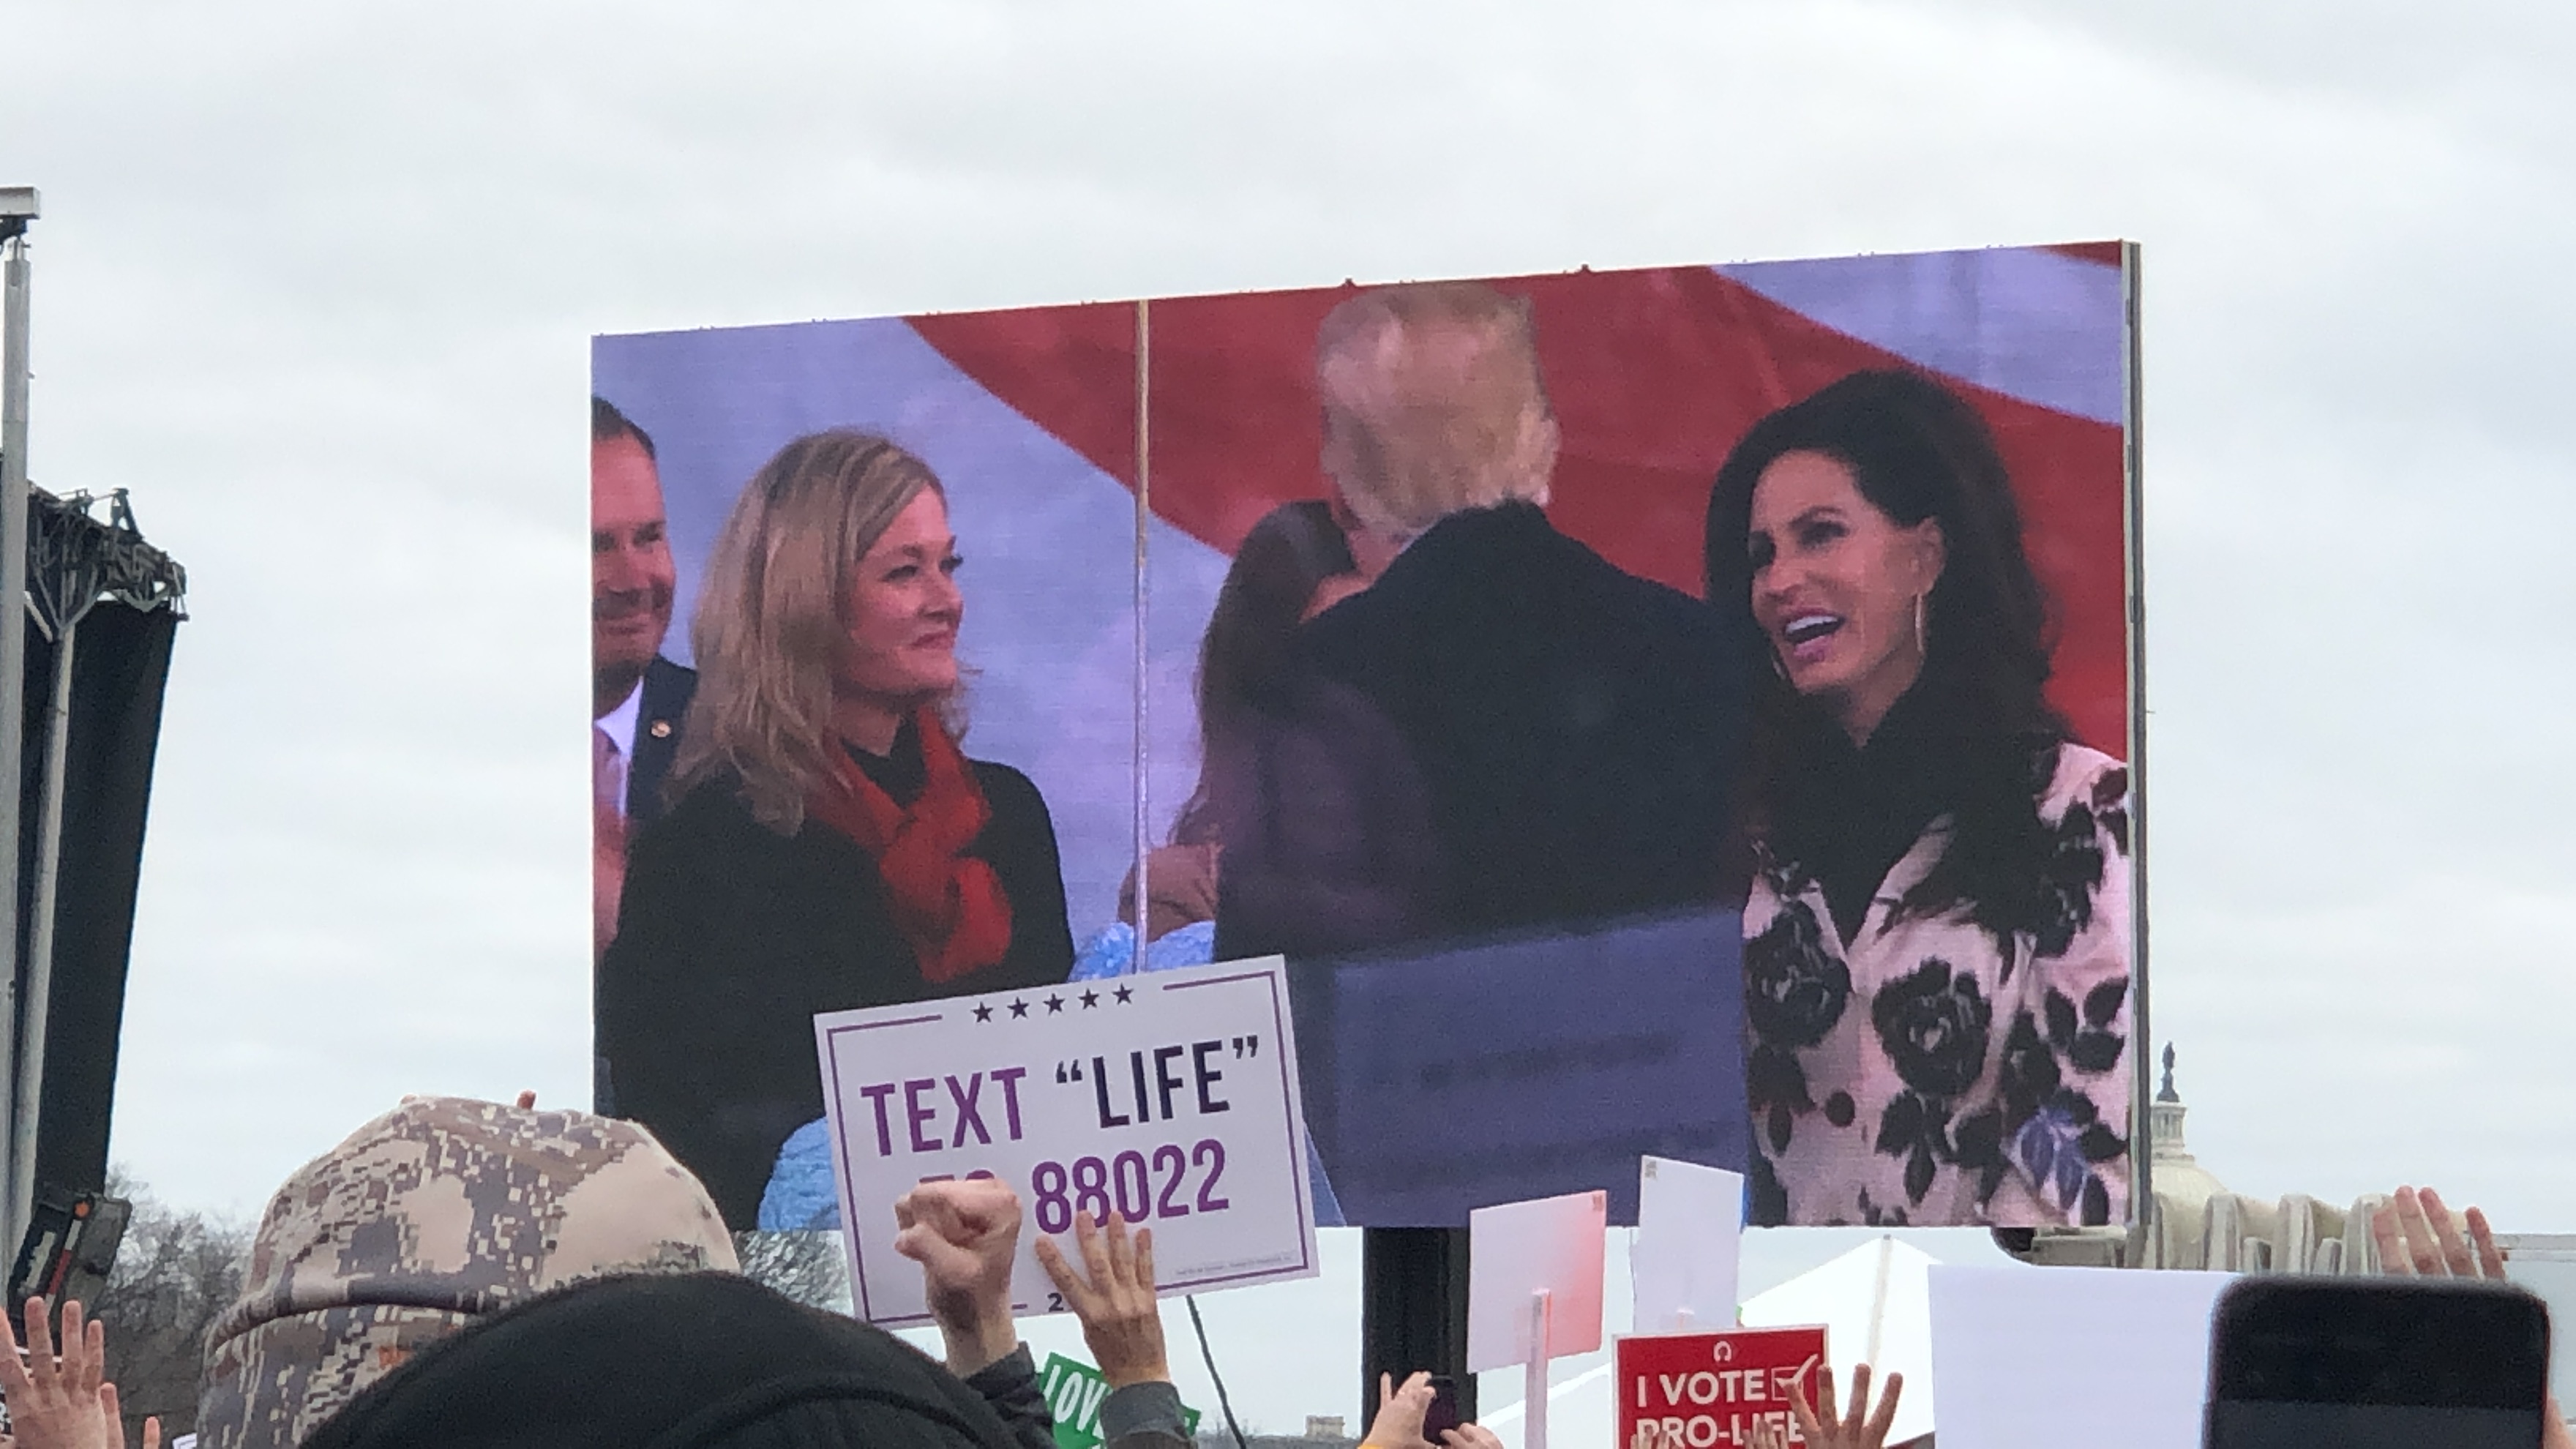 CWA CEO and President at 2020 March for Life with President Donald Trump